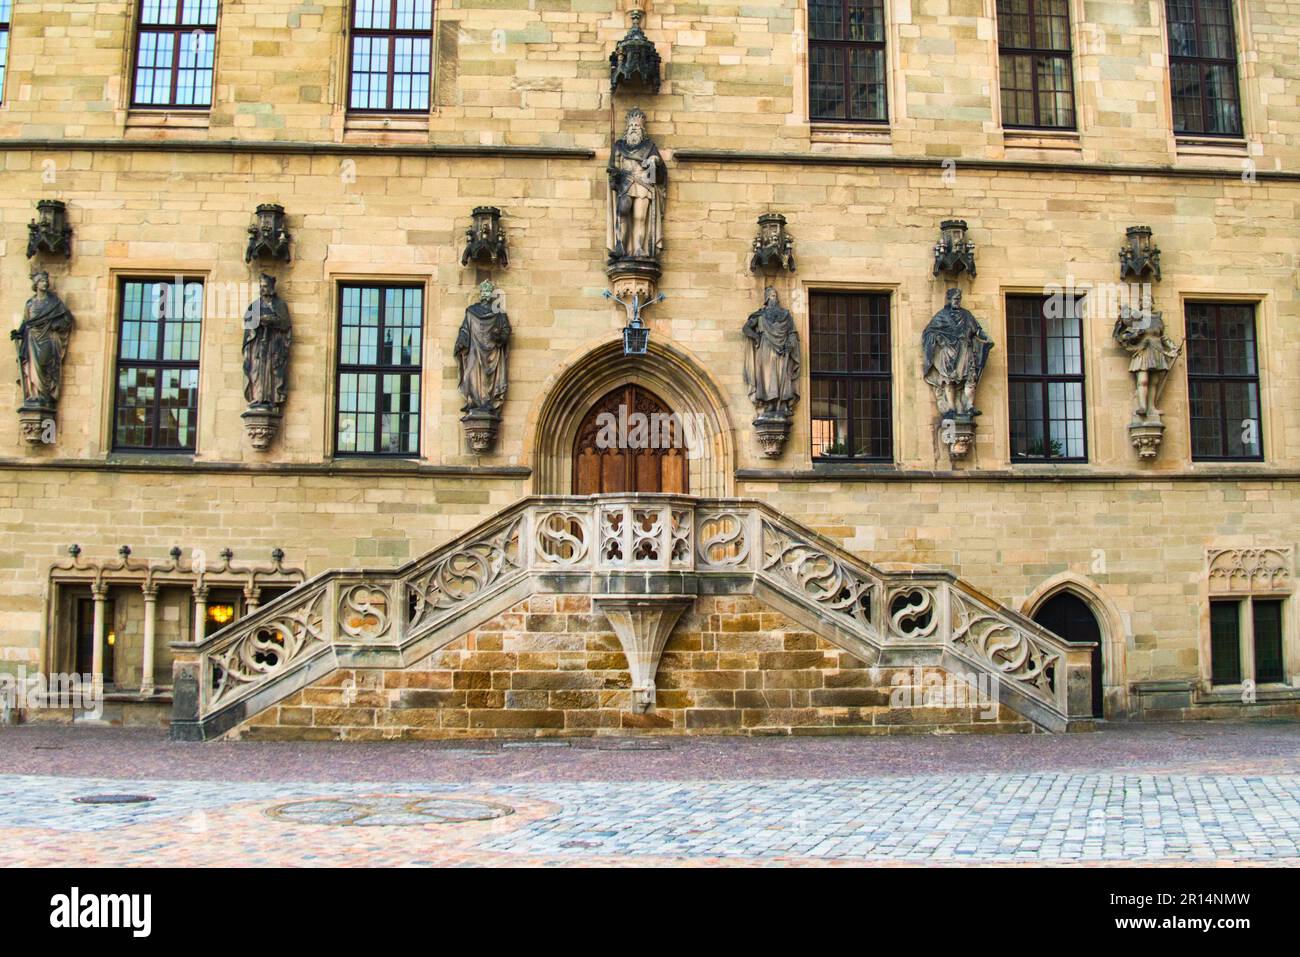 Staircase of Osnabrück town hall View of the facade of the historic building in which the Peace of Westphalia was decided in 1648 Stock Photo